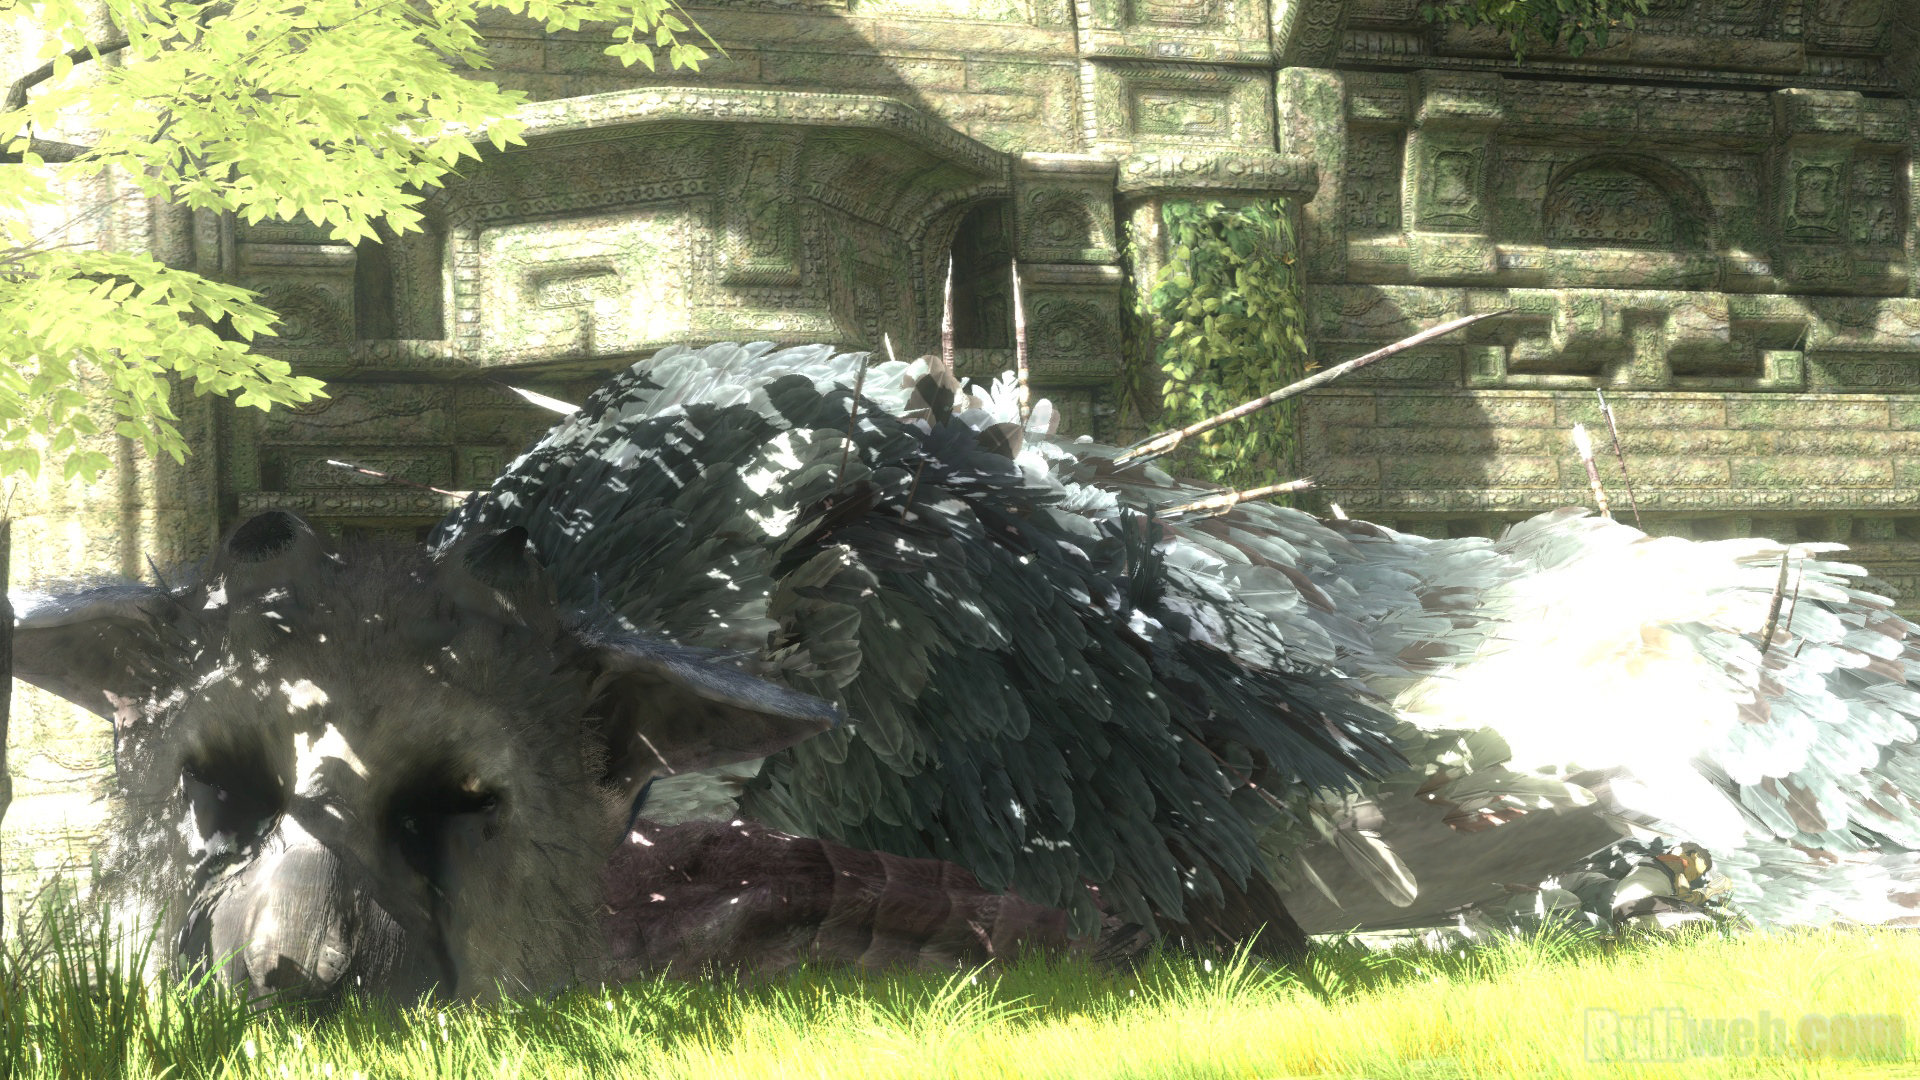 Video Game The Last Guardian 1920x1080